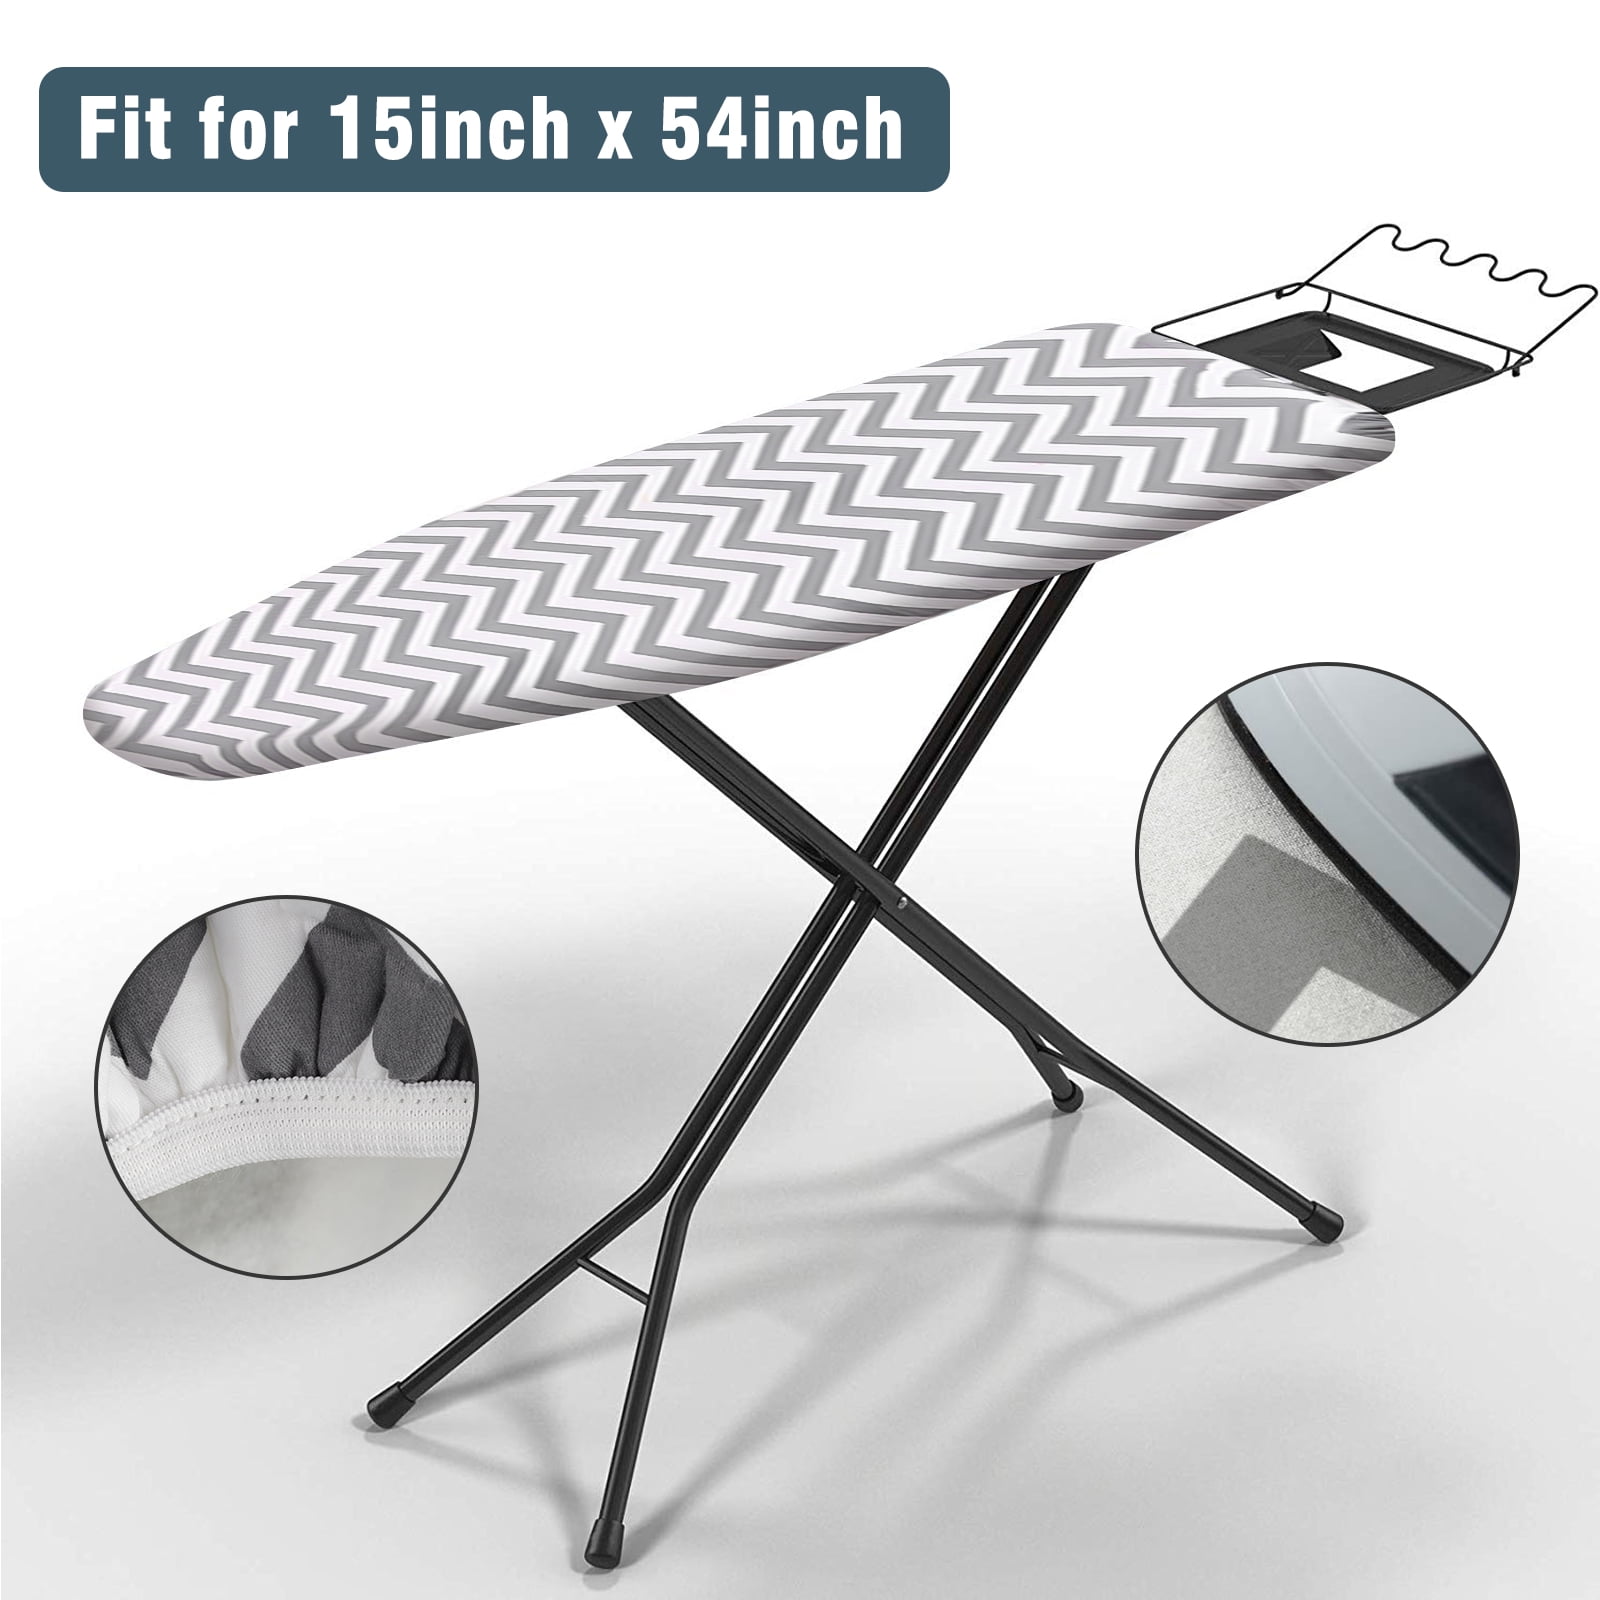 scorch resistant coating 20" x 60" ironing board cover Metallic heat-reflective 